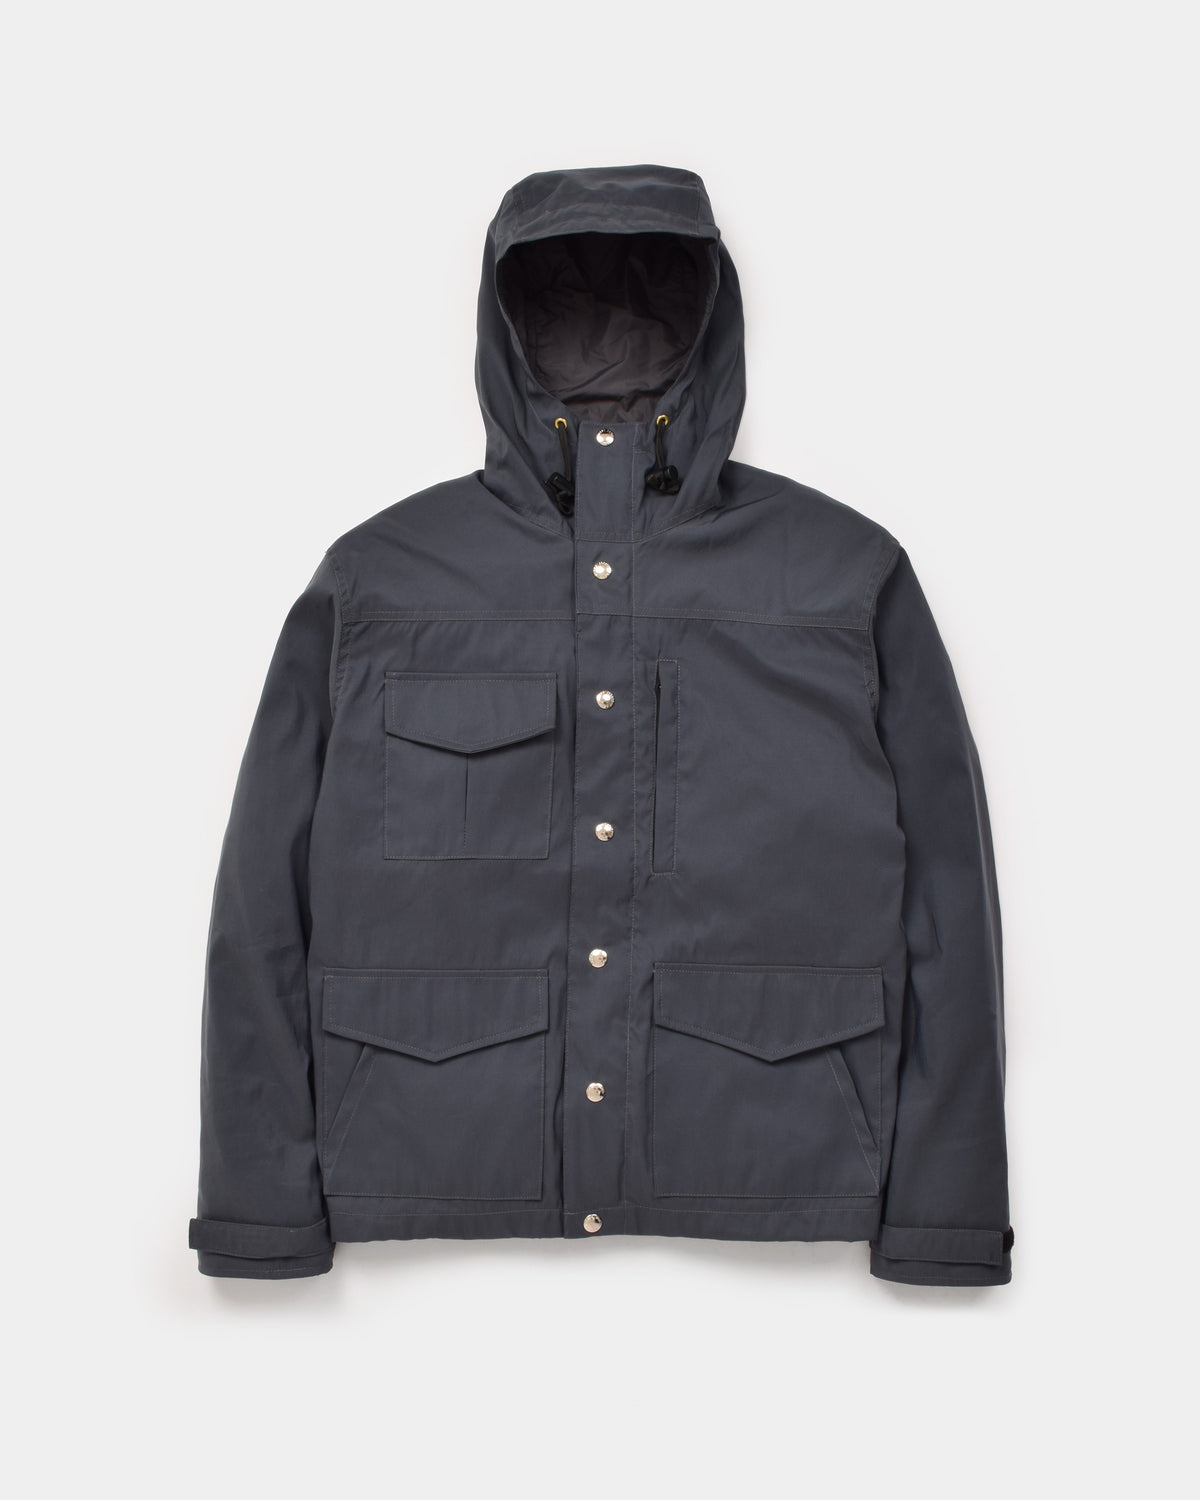 Michi Jacket - Charcoal - Crescent Down Works